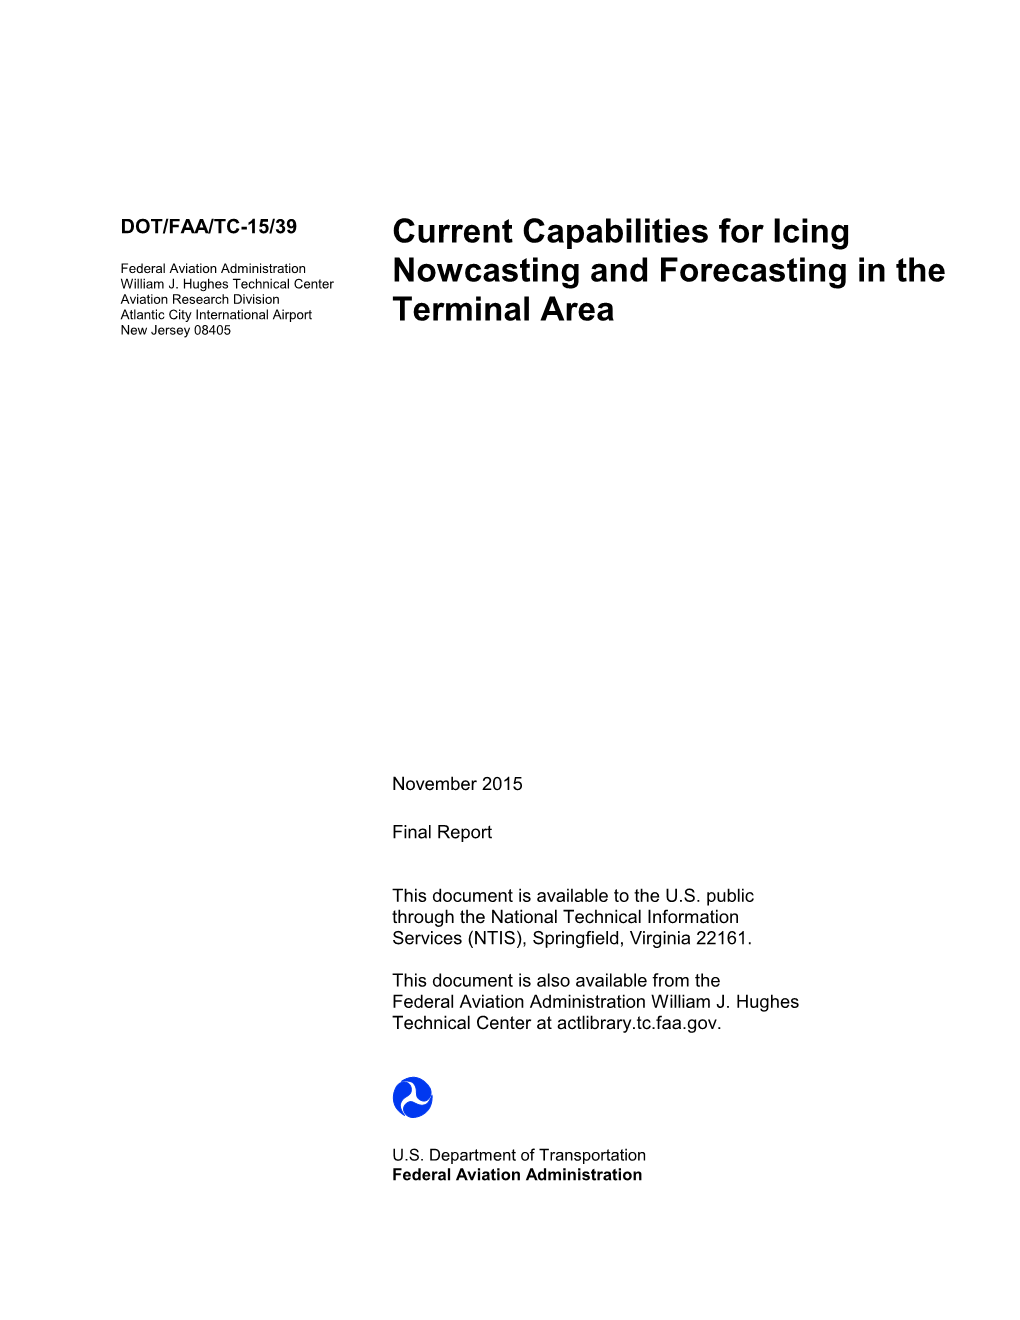 Current Capabilities for Icing Nowcasting and Forecasting in the Terminal Area